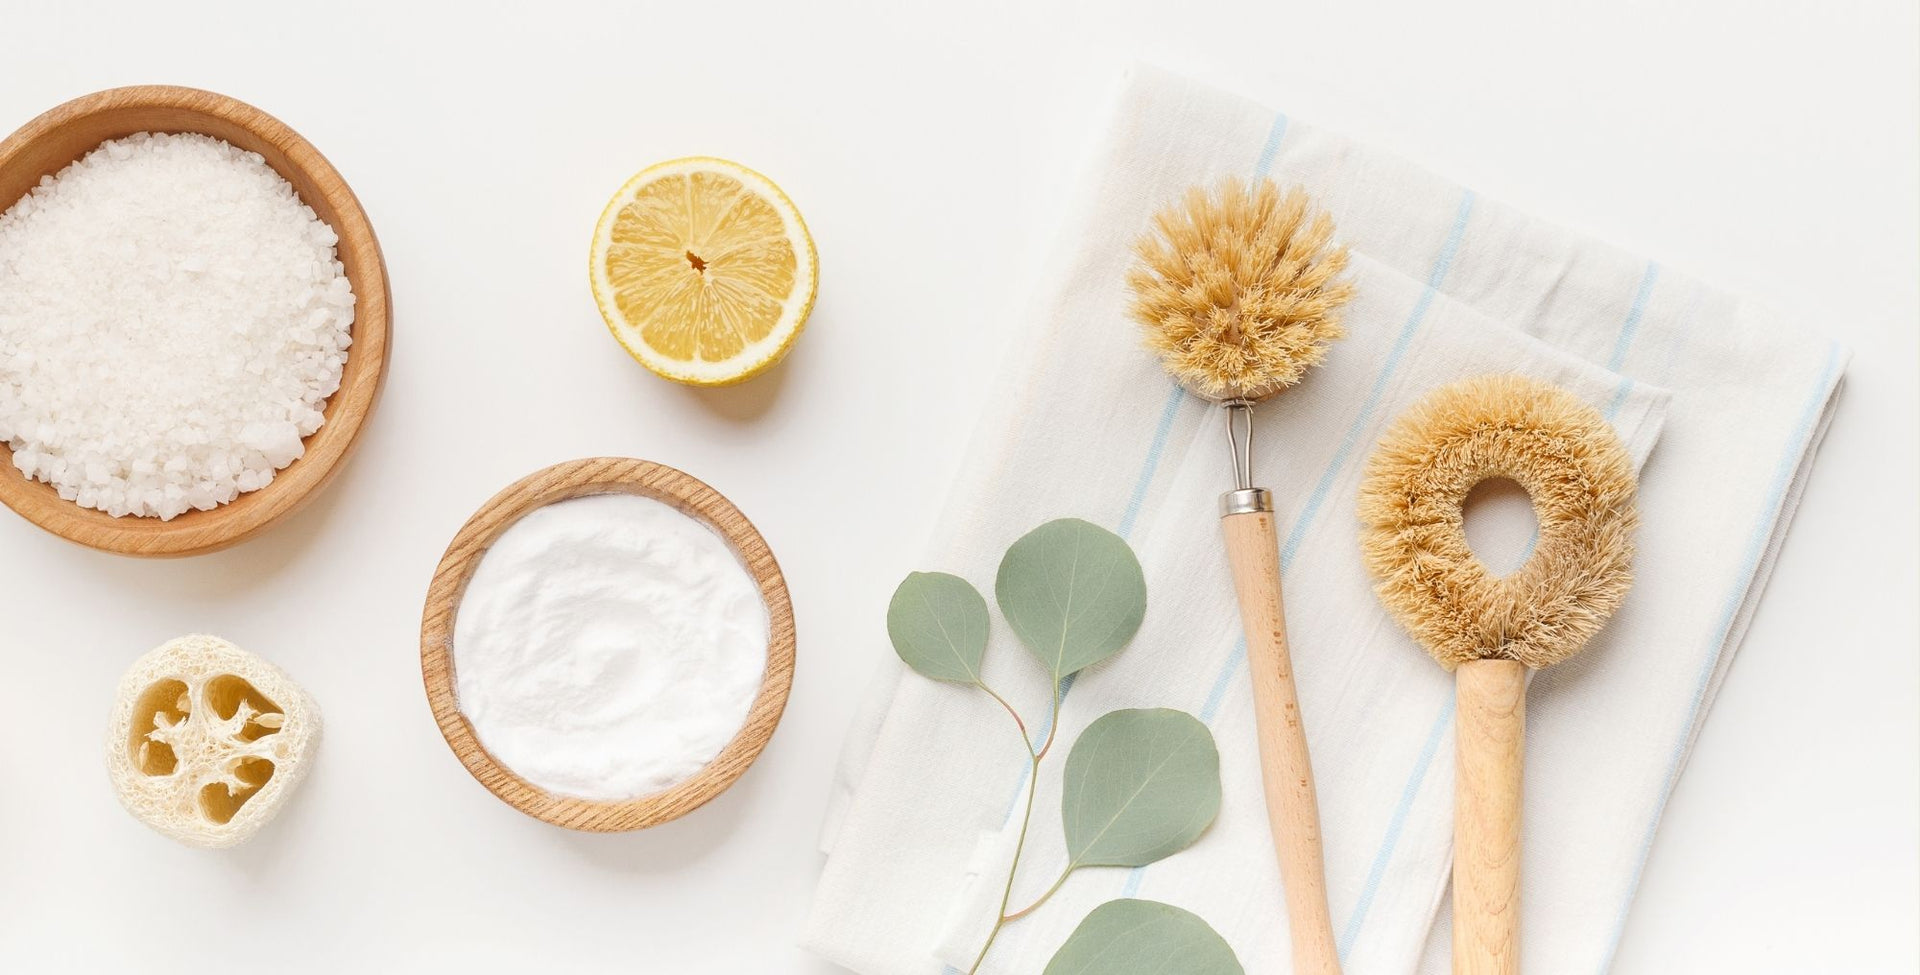 Revitalise your home with an organic spring clean!